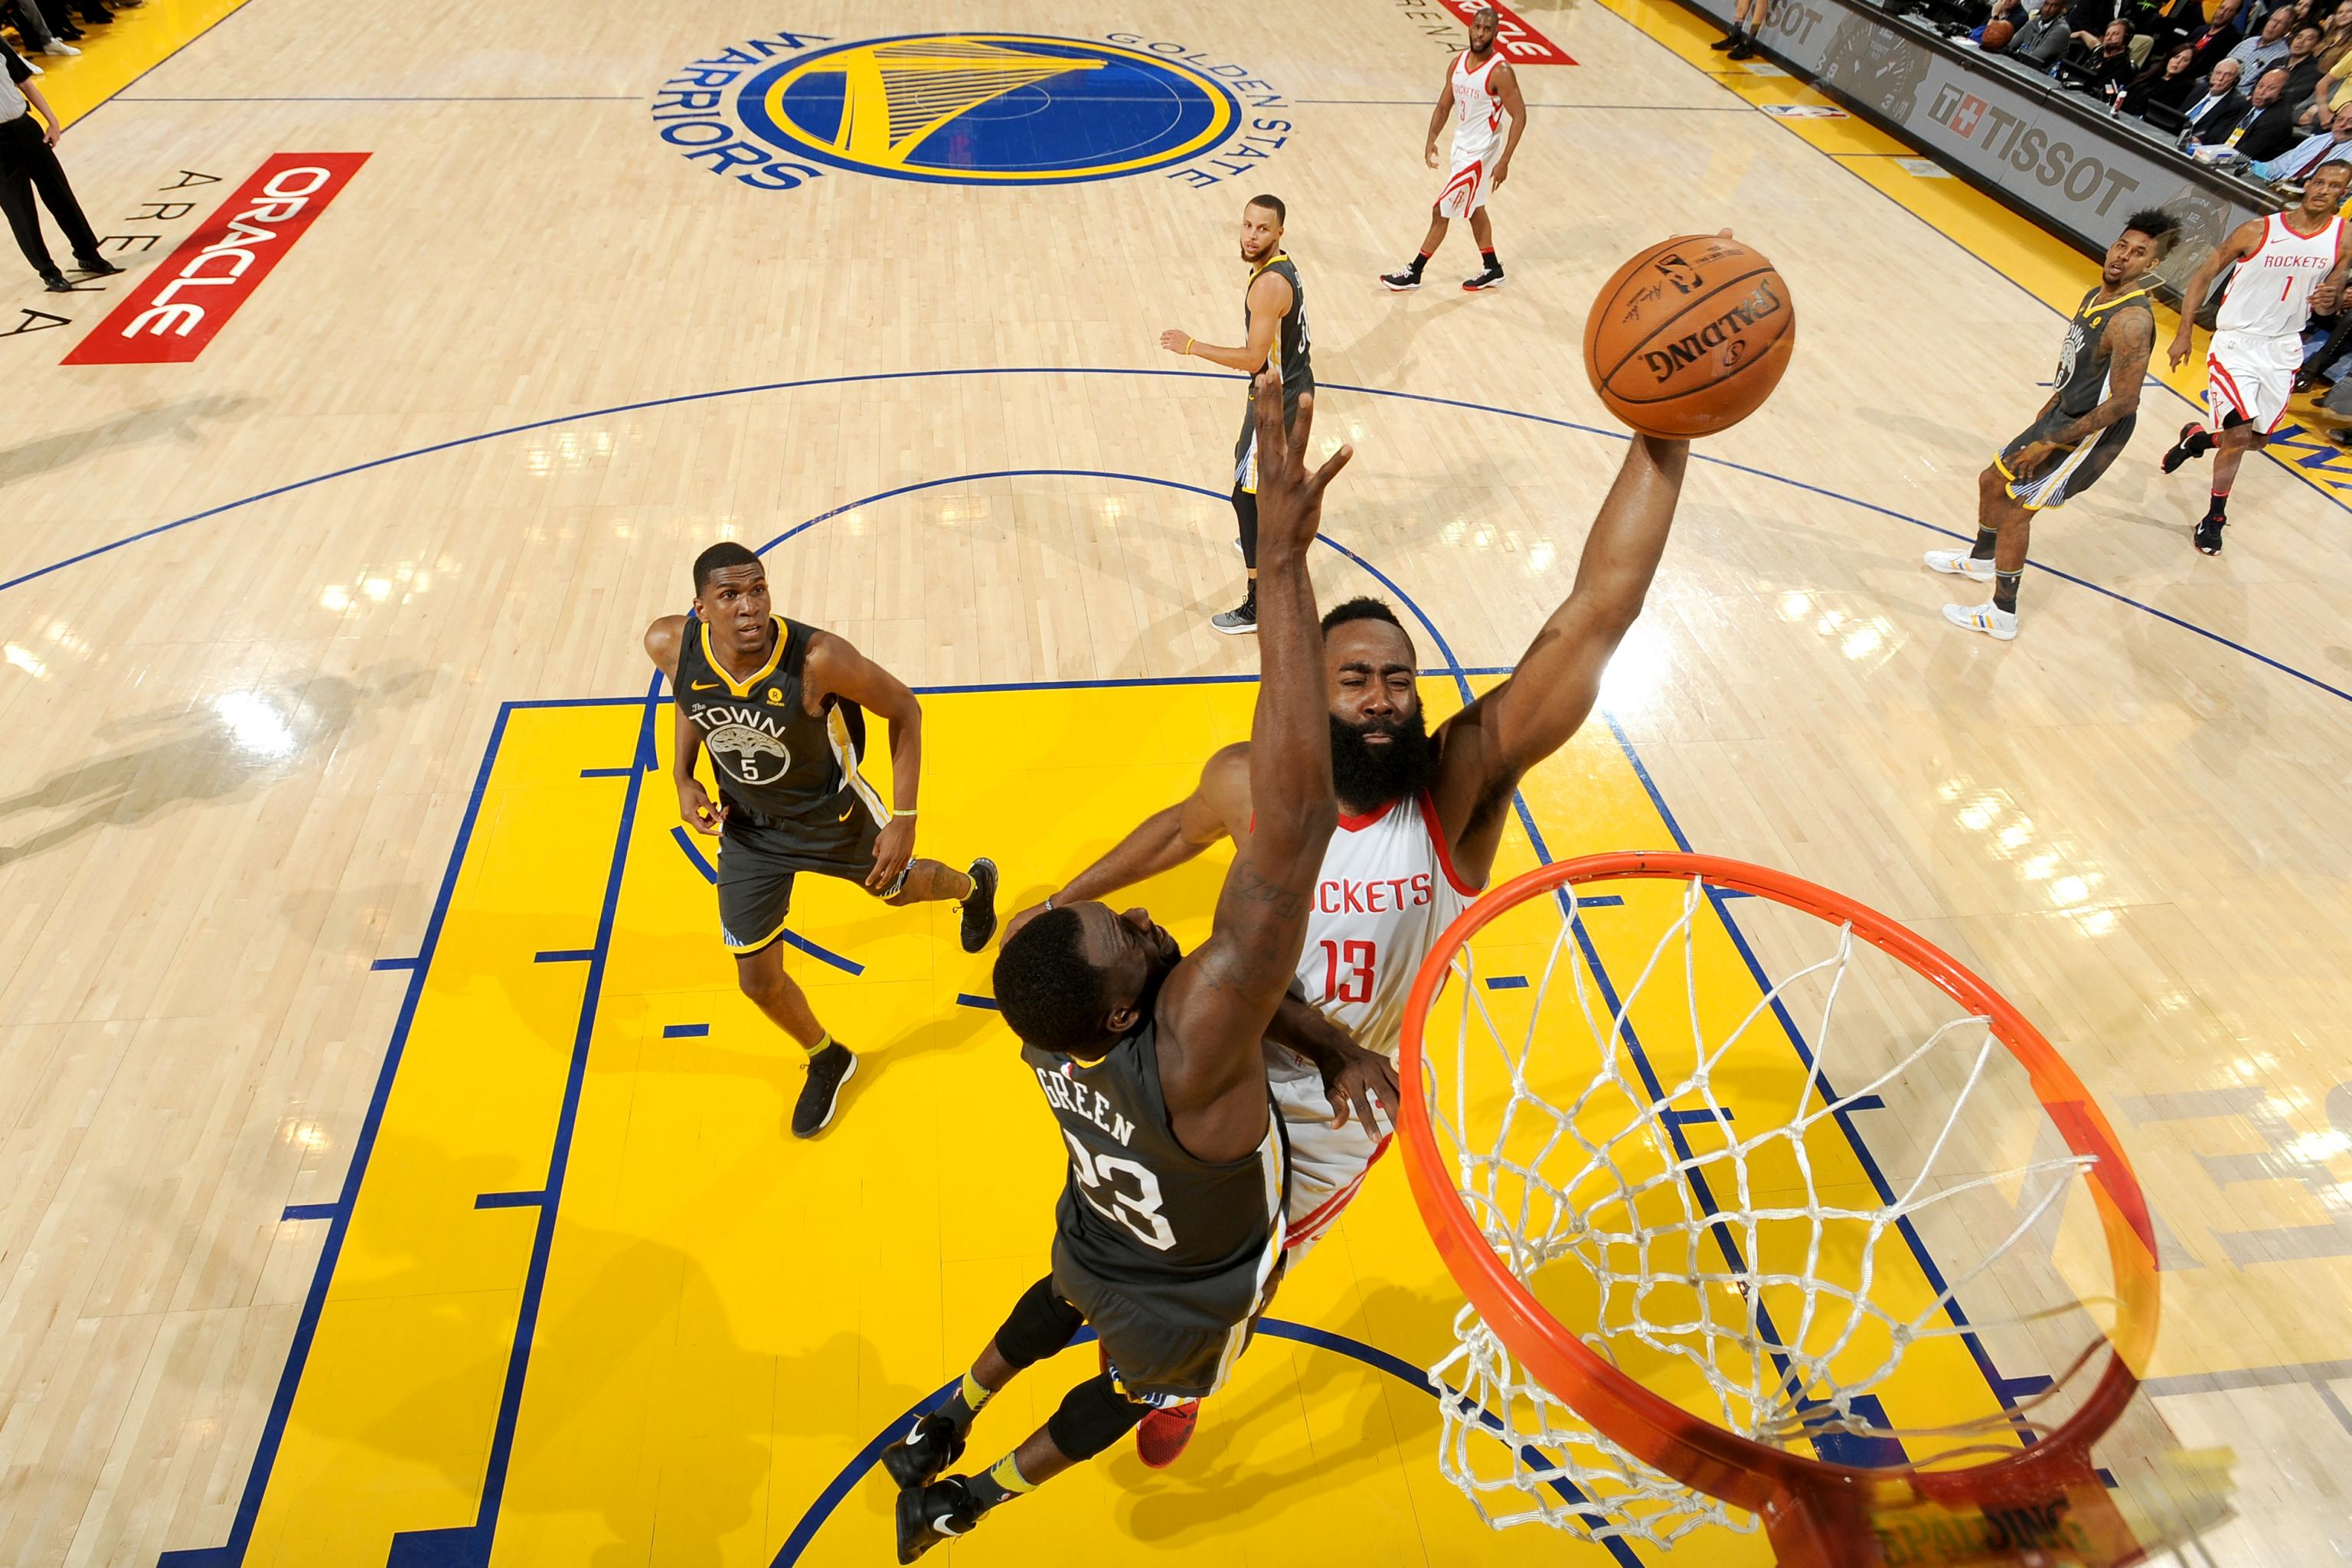 Twitter in Disbelief After James Harden's Iconic Dunk over Draymond Green. Bleacher Report. Latest News, Videos and Highlights